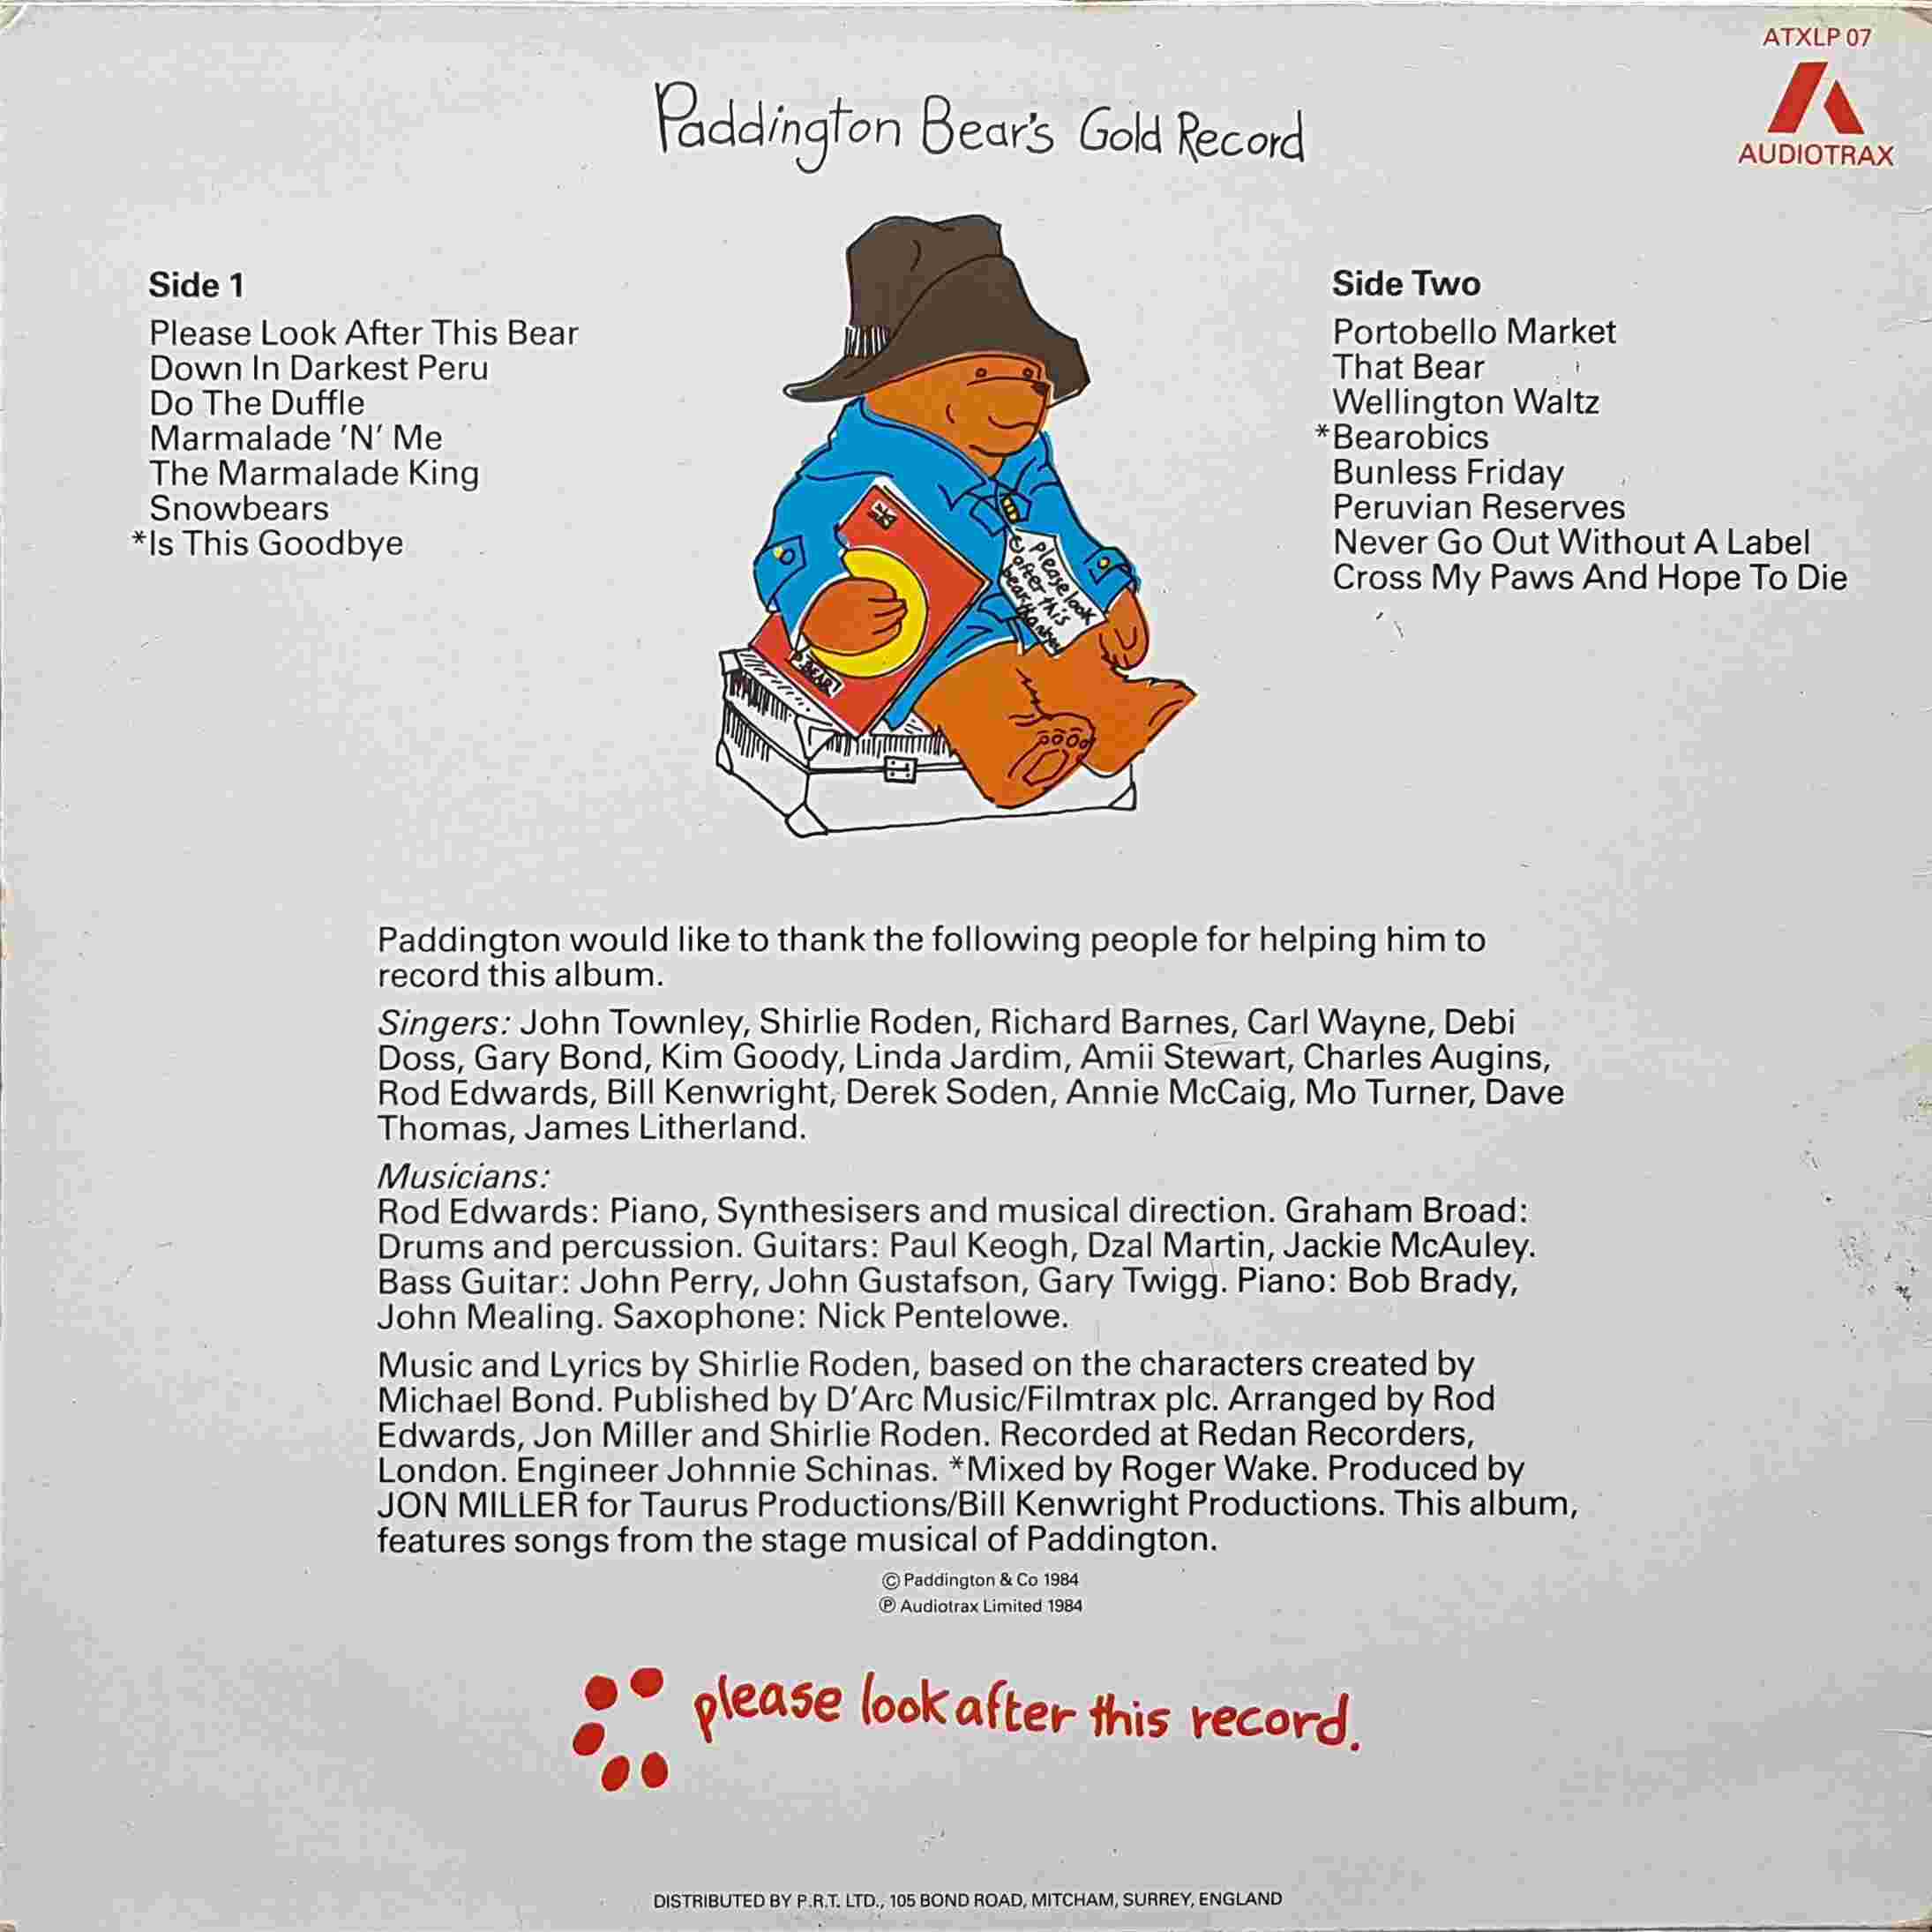 Picture of ATXLP 07 Paddington Bear's gold record by artist Various from ITV, Channel 4 and Channel 5 library